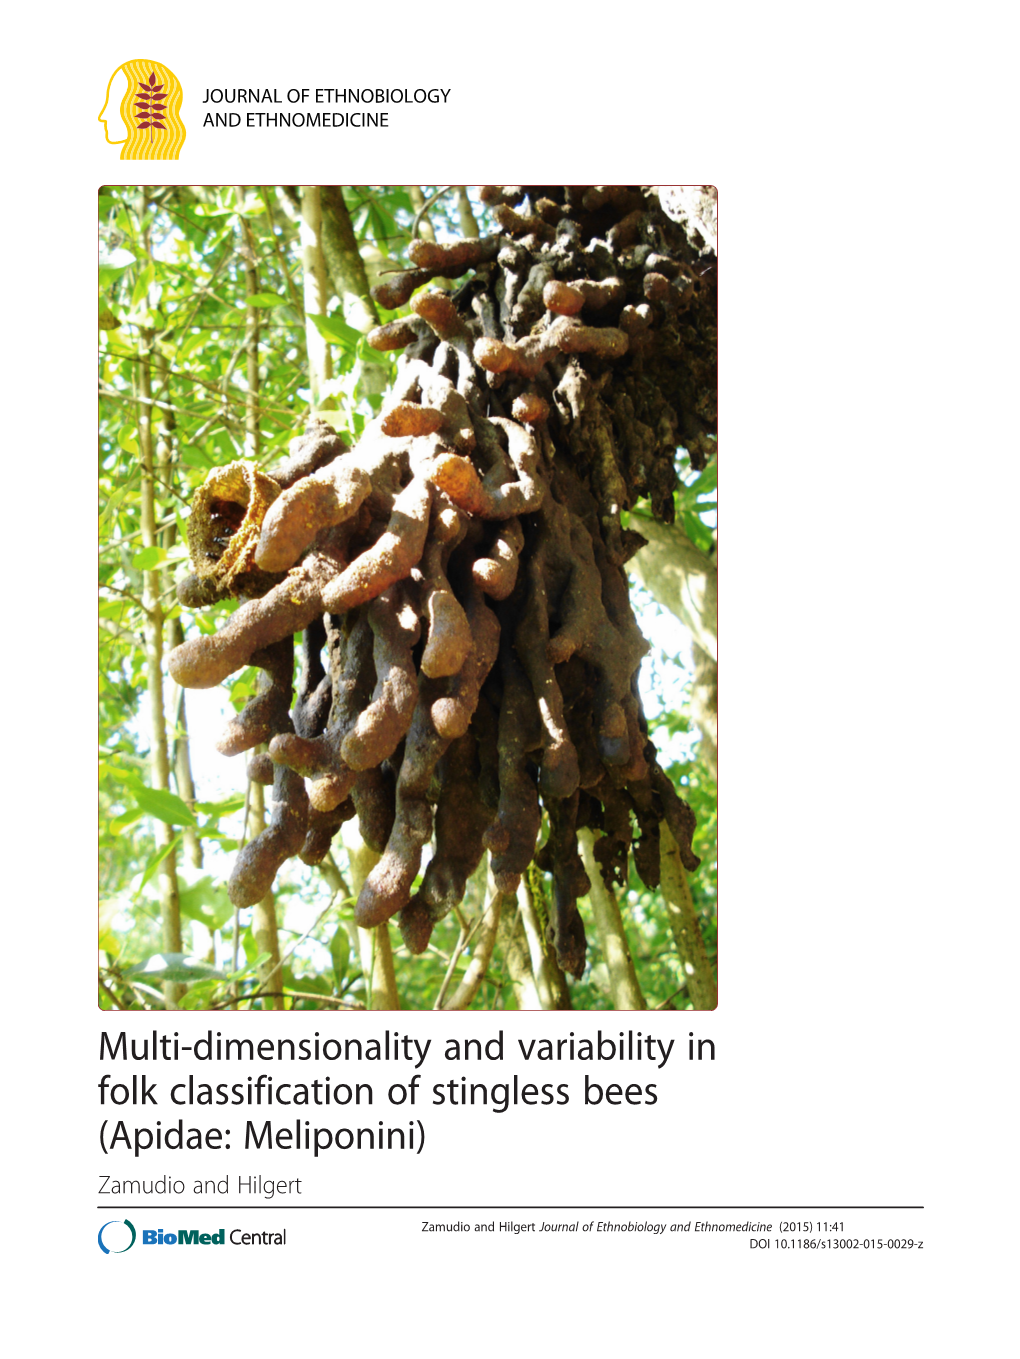 Multi-Dimensionality and Variability in Folk Classification of Stingless Bees (Apidae: Meliponini) Zamudio and Hilgert